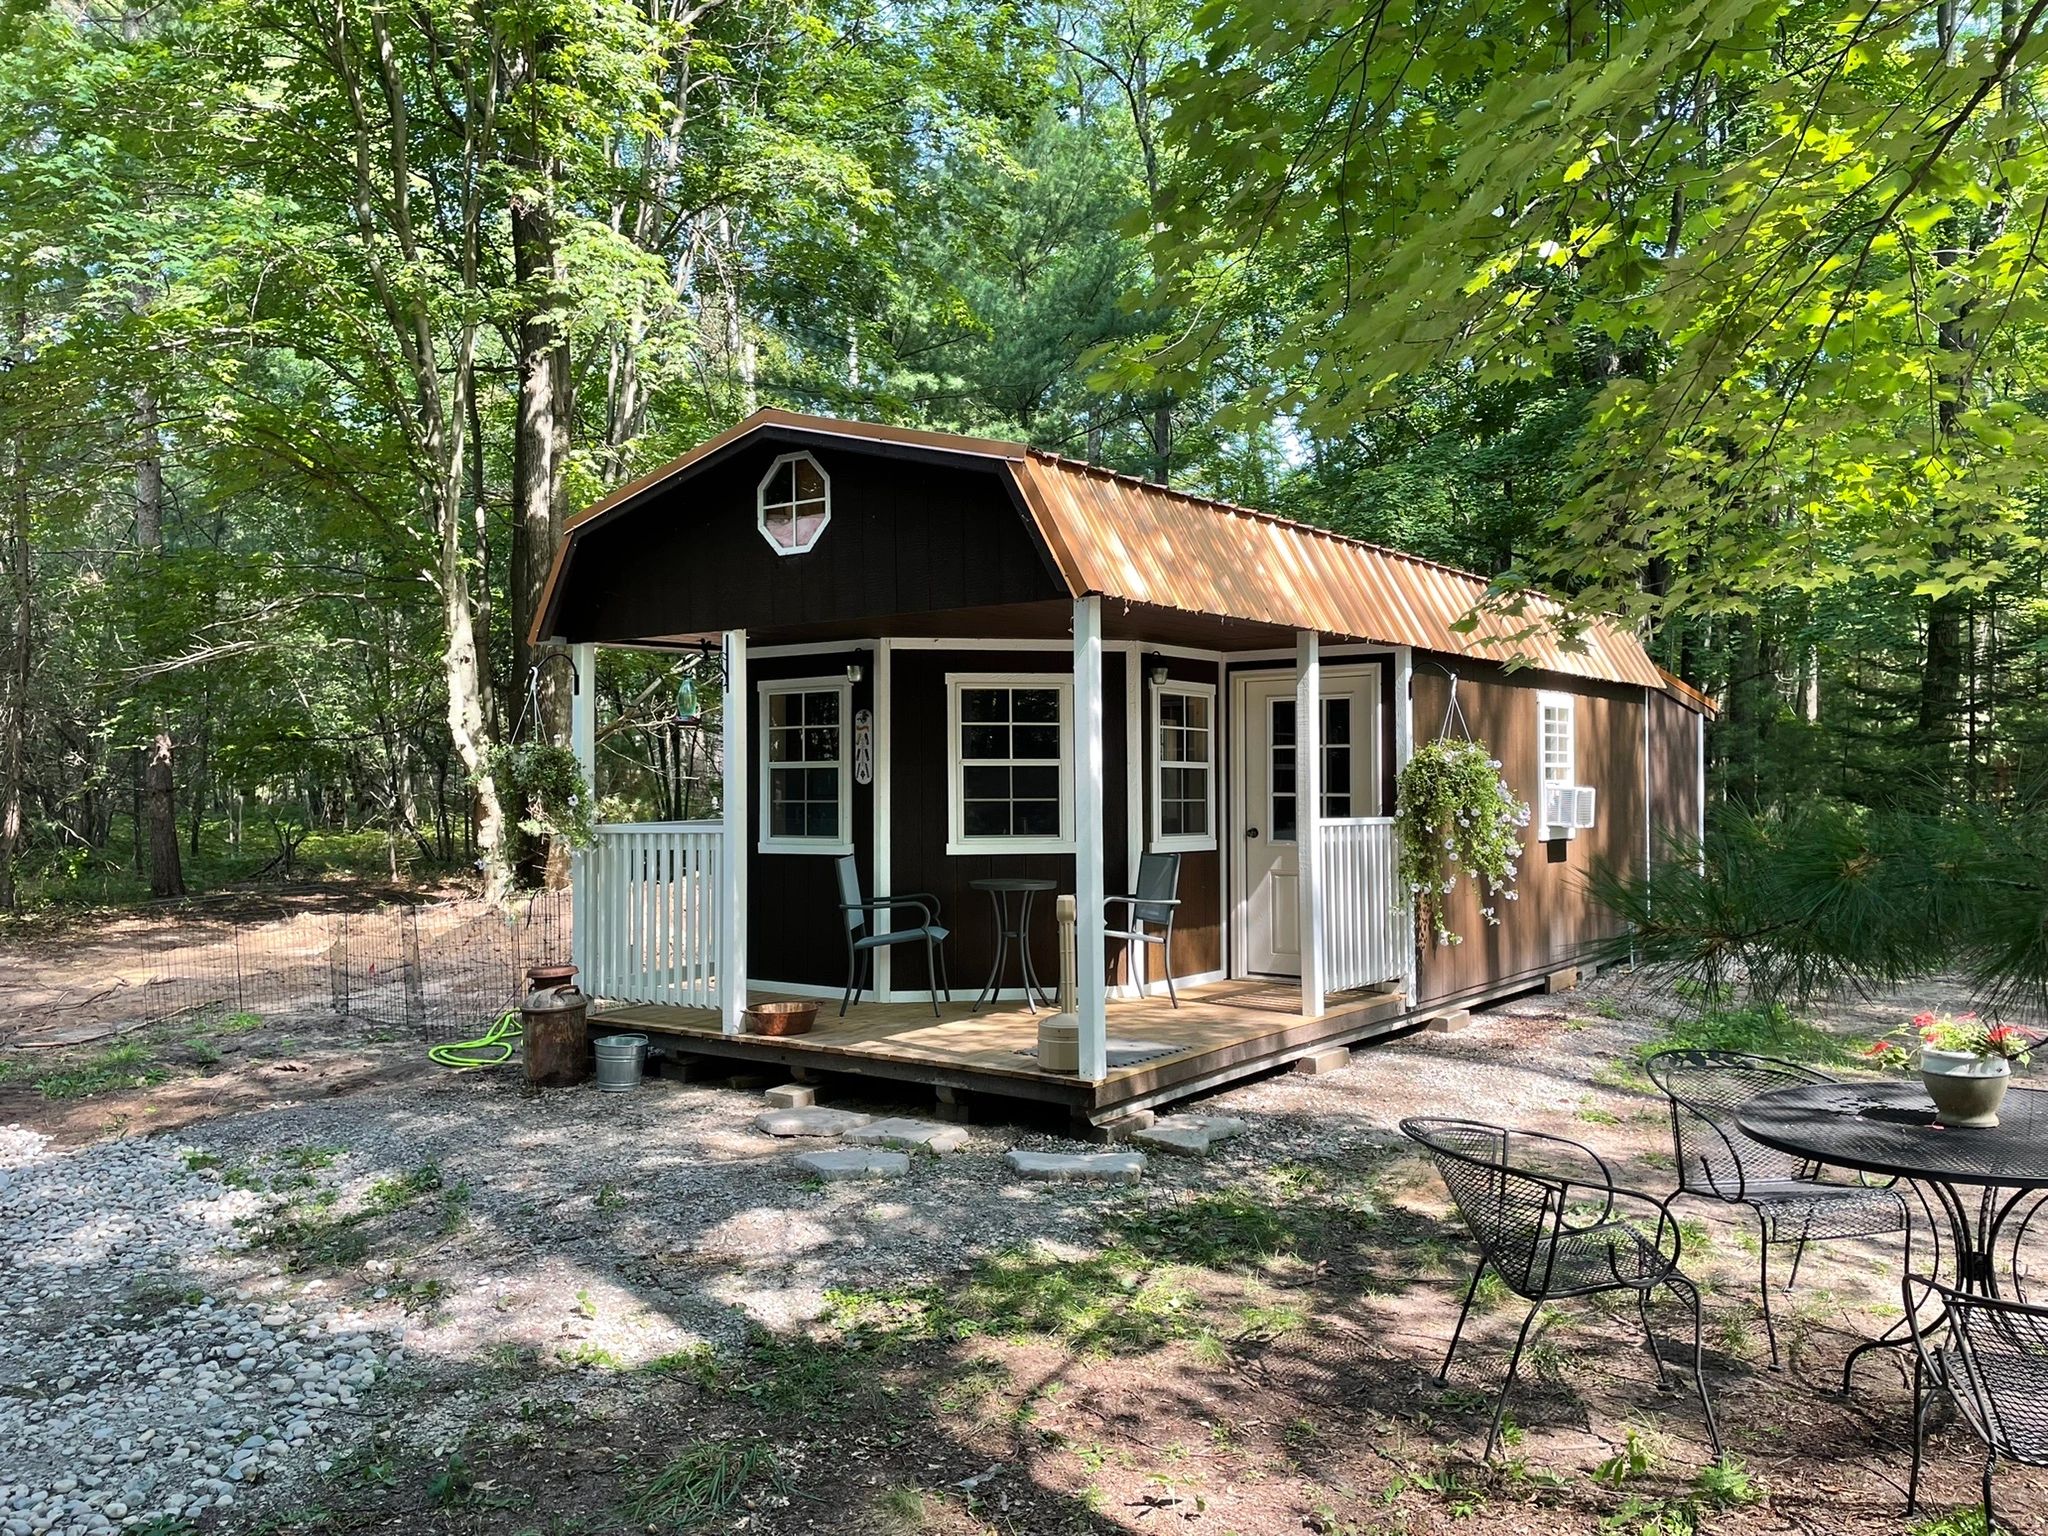 This is our newest edition. The “Winchester” a tiny cabin with full amenities that sleeps 3.